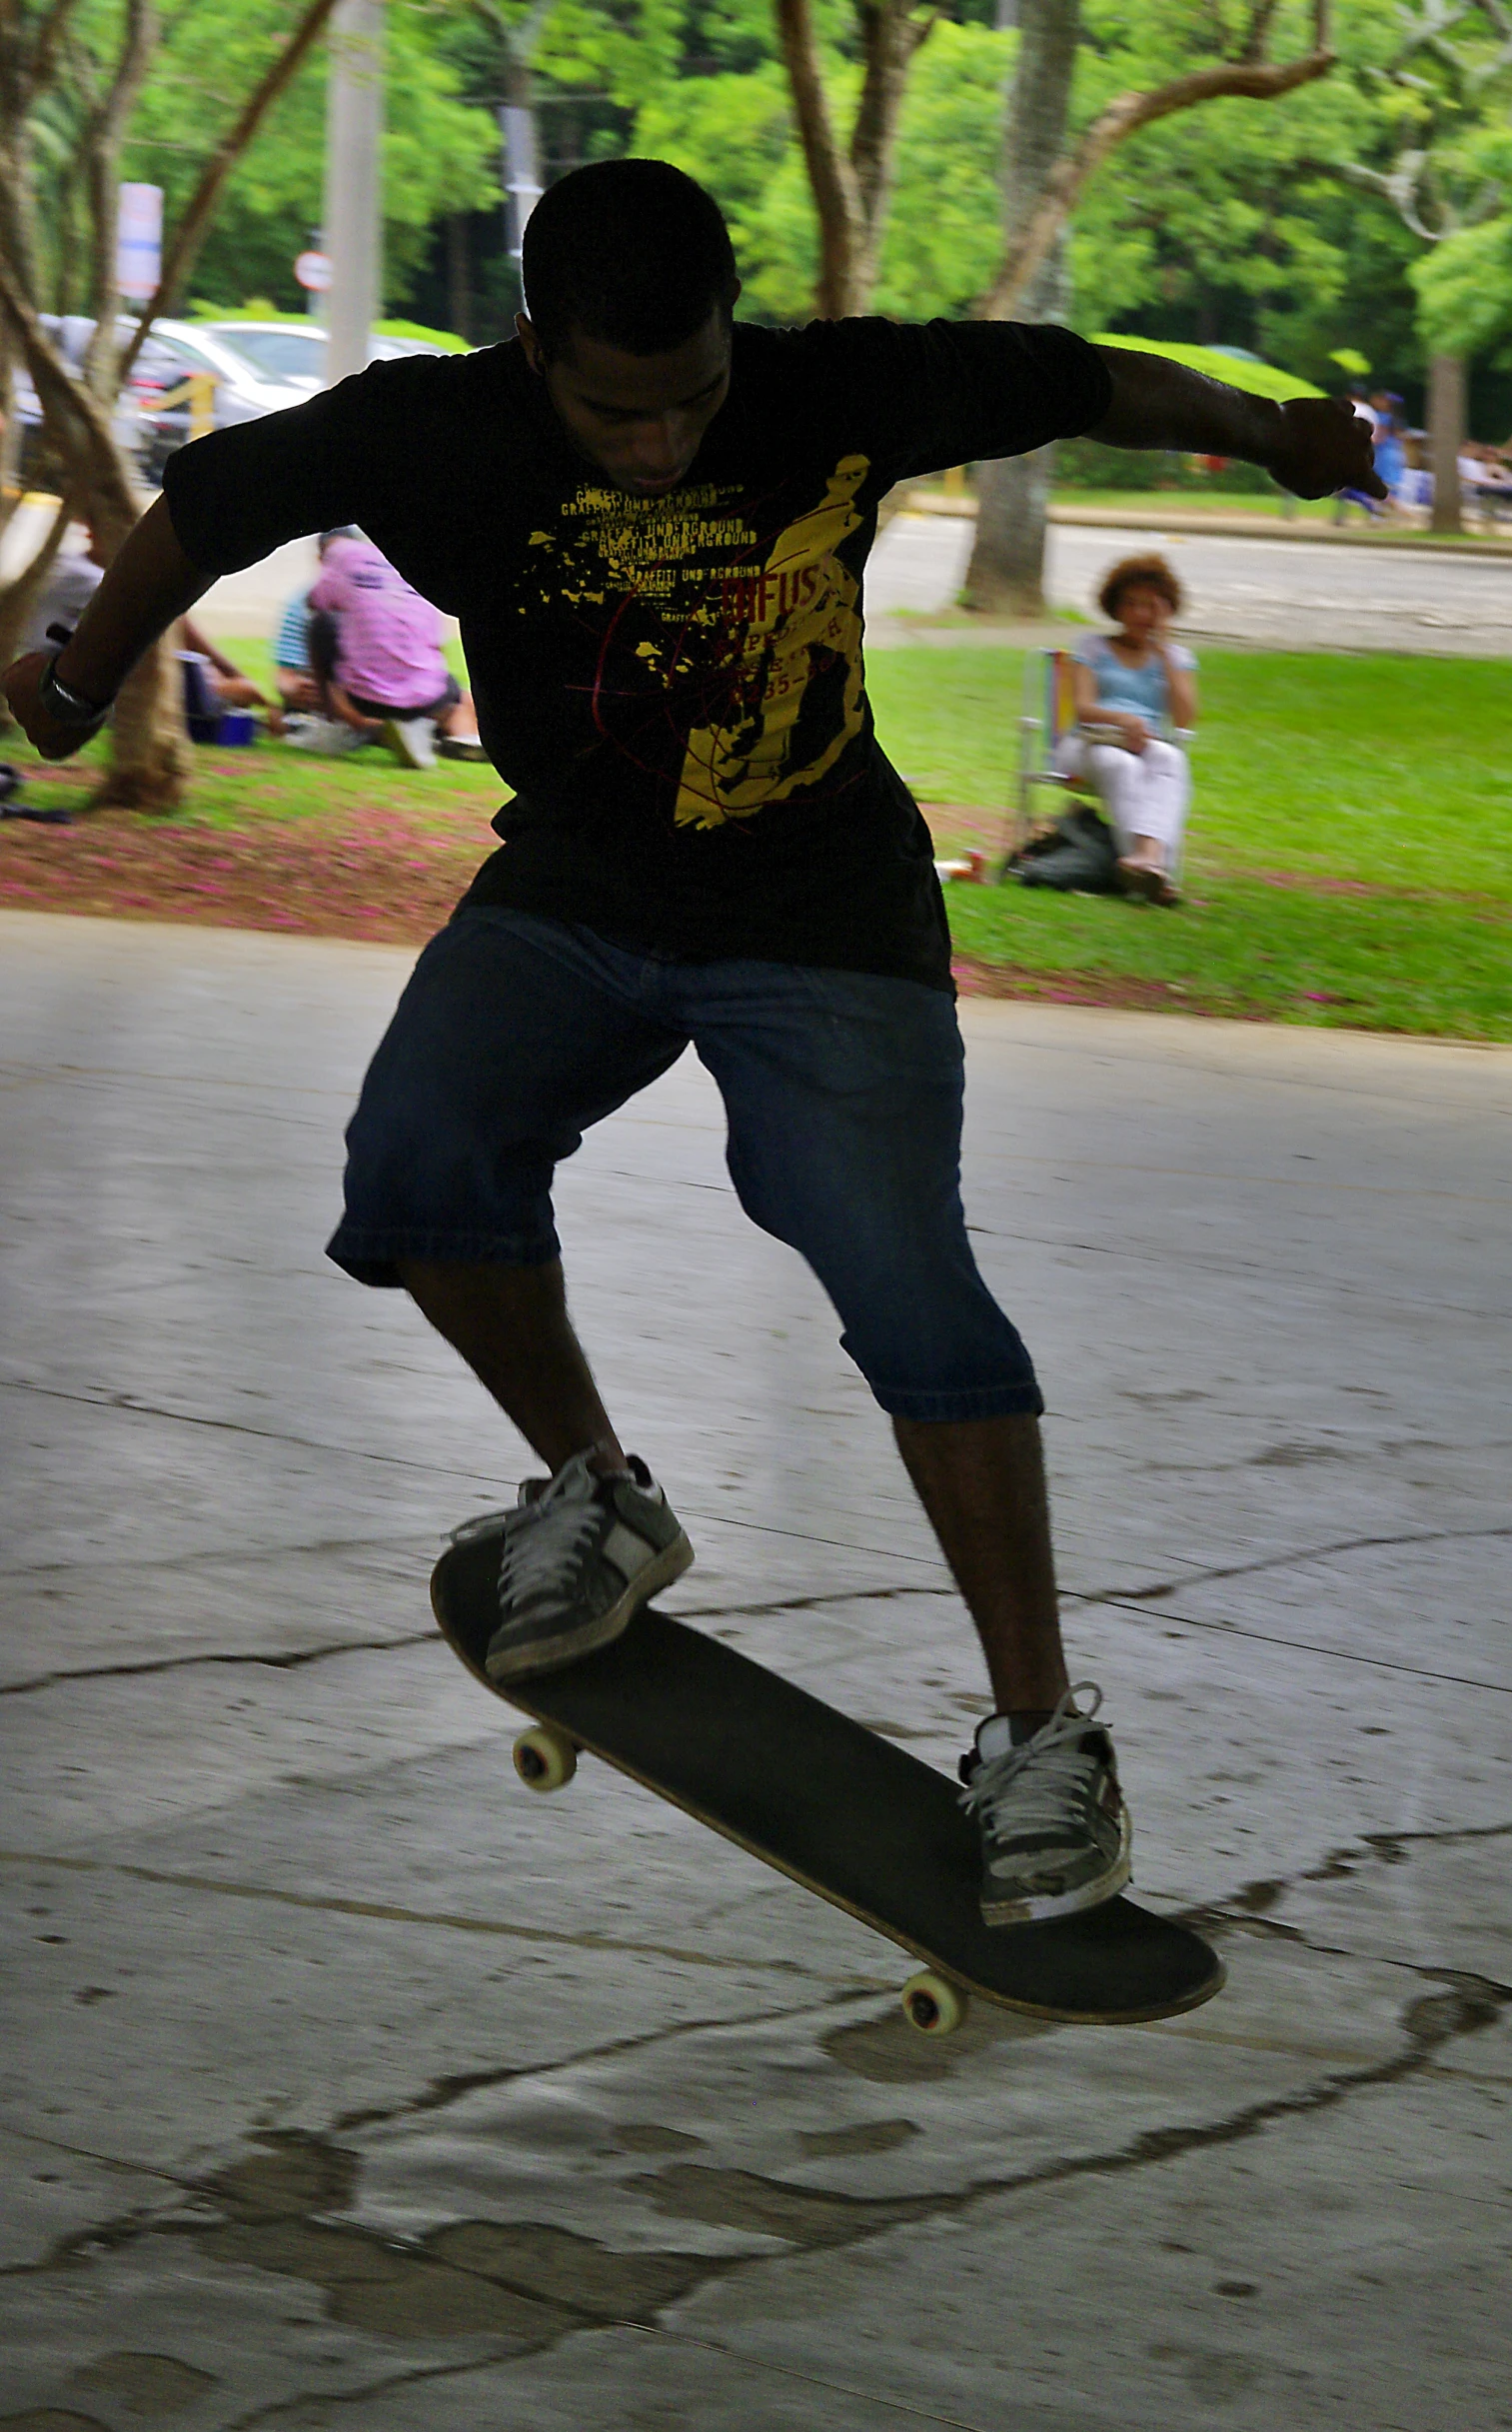 a man who is doing tricks on a skateboard